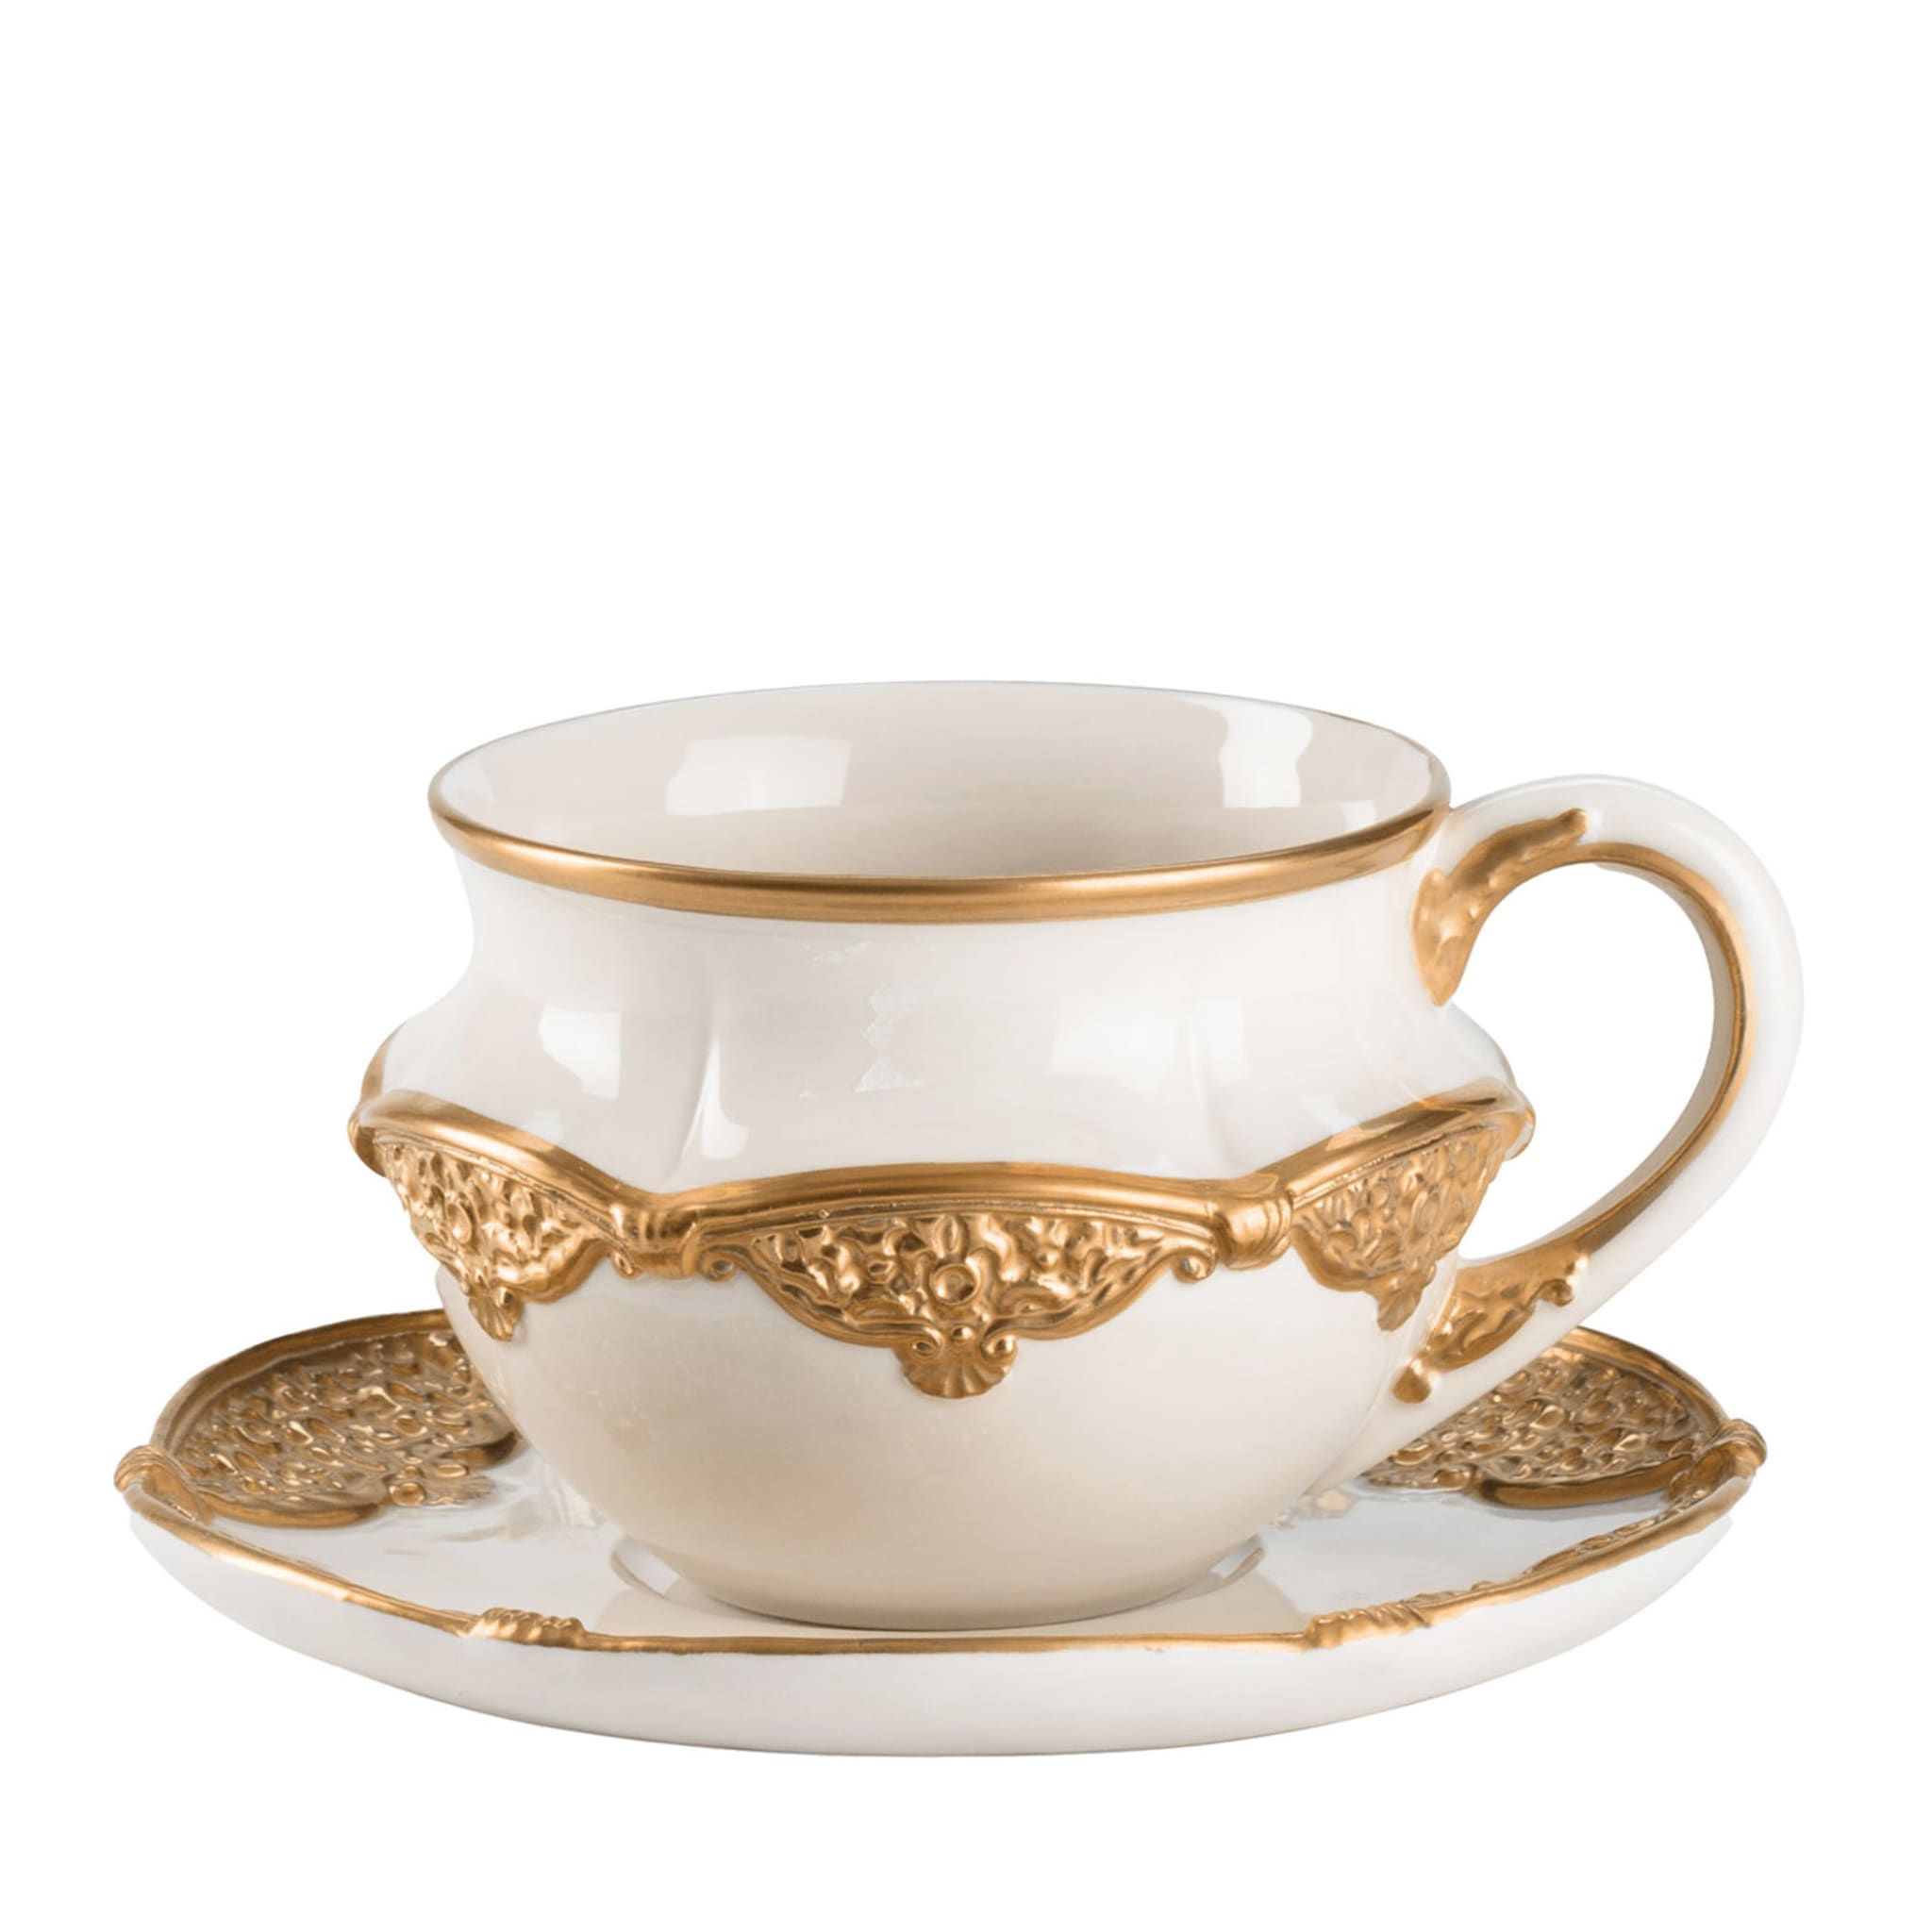 Caterina Large White & Gold Tea Cup with Saucer - Main view